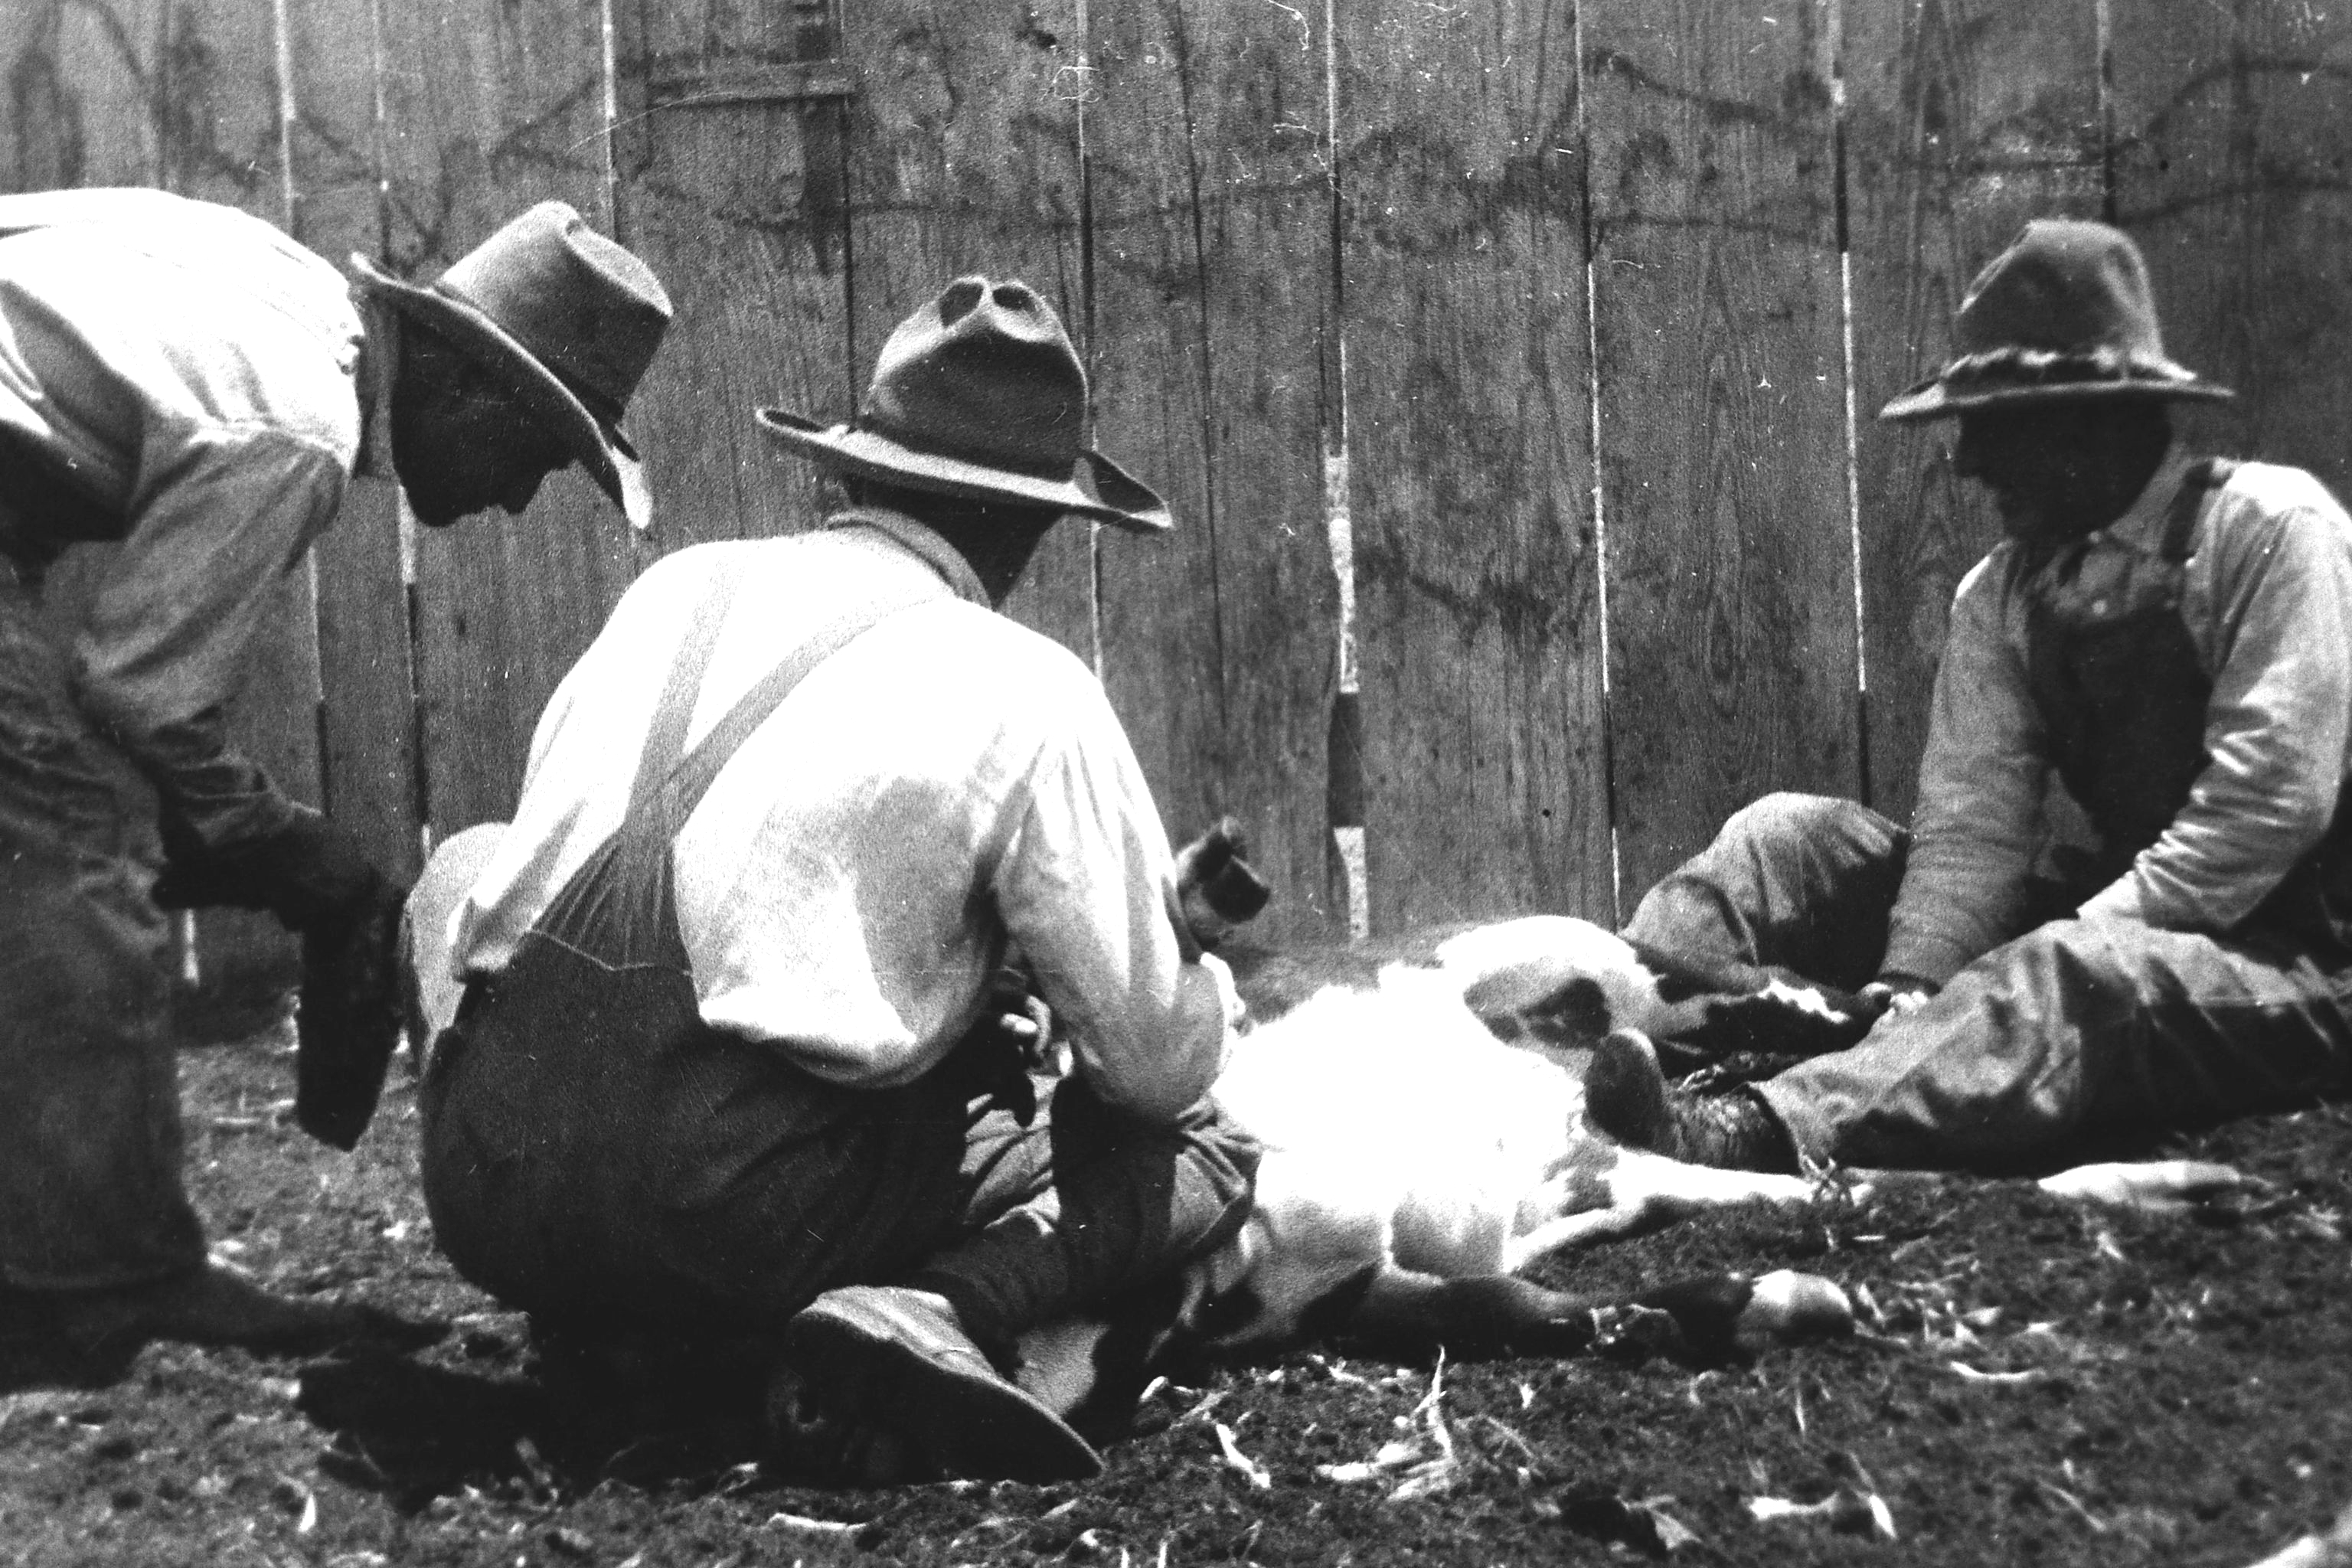 Cowboys Working Cattle in Hart TX in 1917